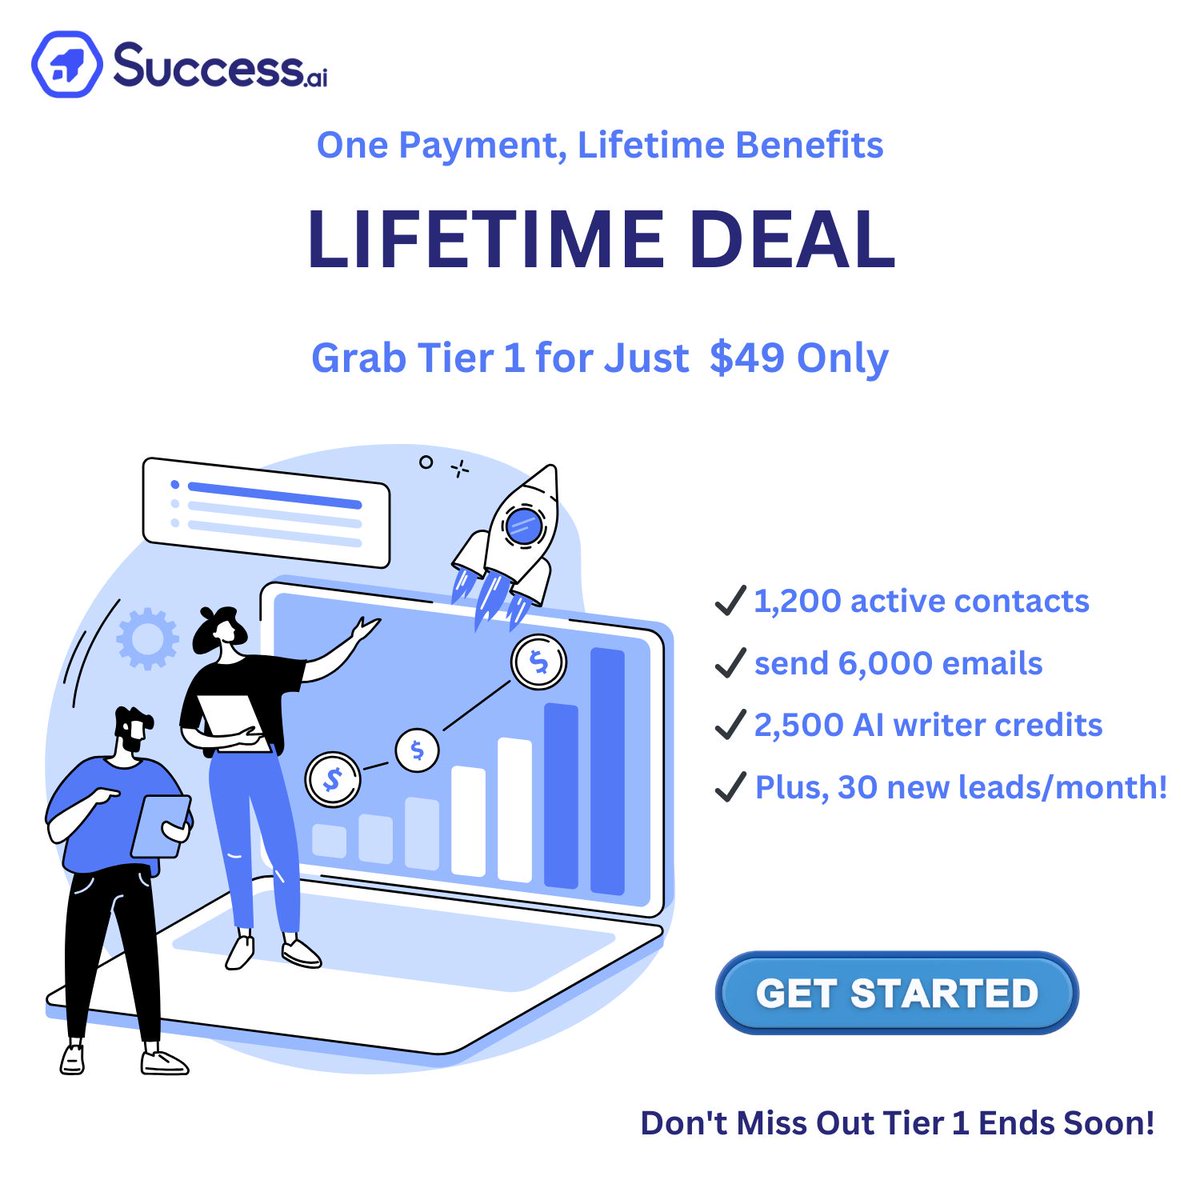 Success.ai LIFETIME DEAL! $49!

✅ 1,200 contacts
✅ 6,000 monthly emails
✅ 2,500 AI credits
✅ Bonus: 30 new leads/month!

Join now: appsumo.com/products/succe…

#EmailMarketing #SuccessAI #LimitedDeal